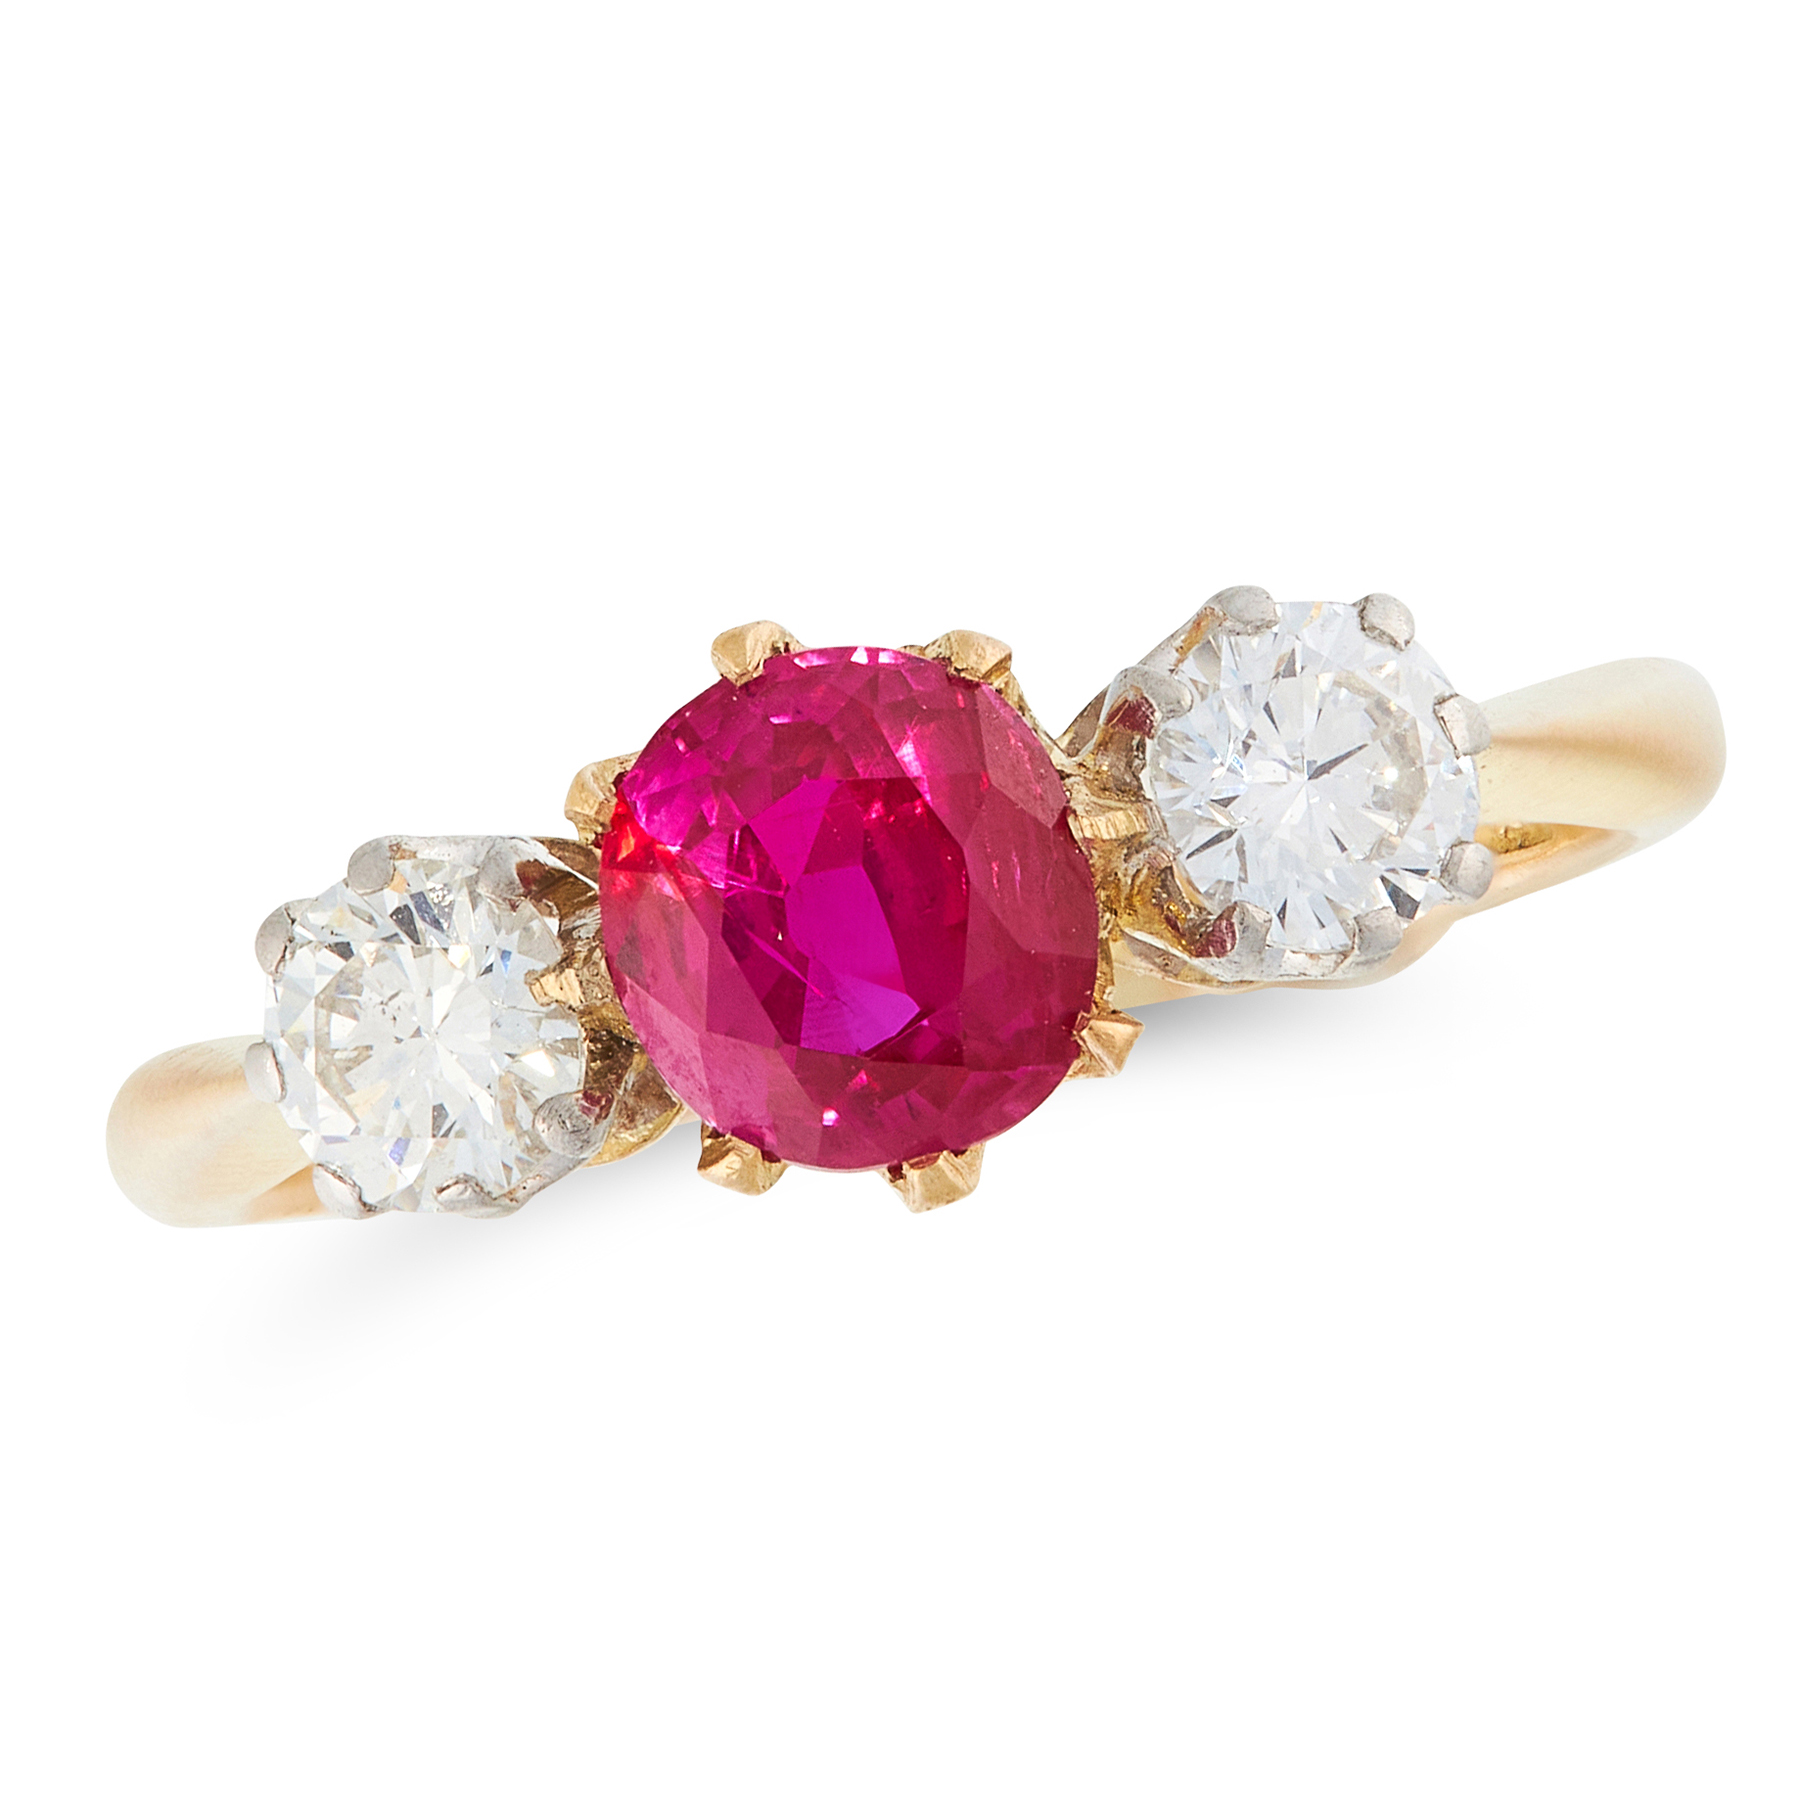 A RUBY AND DIAMOND THREE STONE RING in 18ct yellow gold, set with a round cut ruby of 0.70 carats